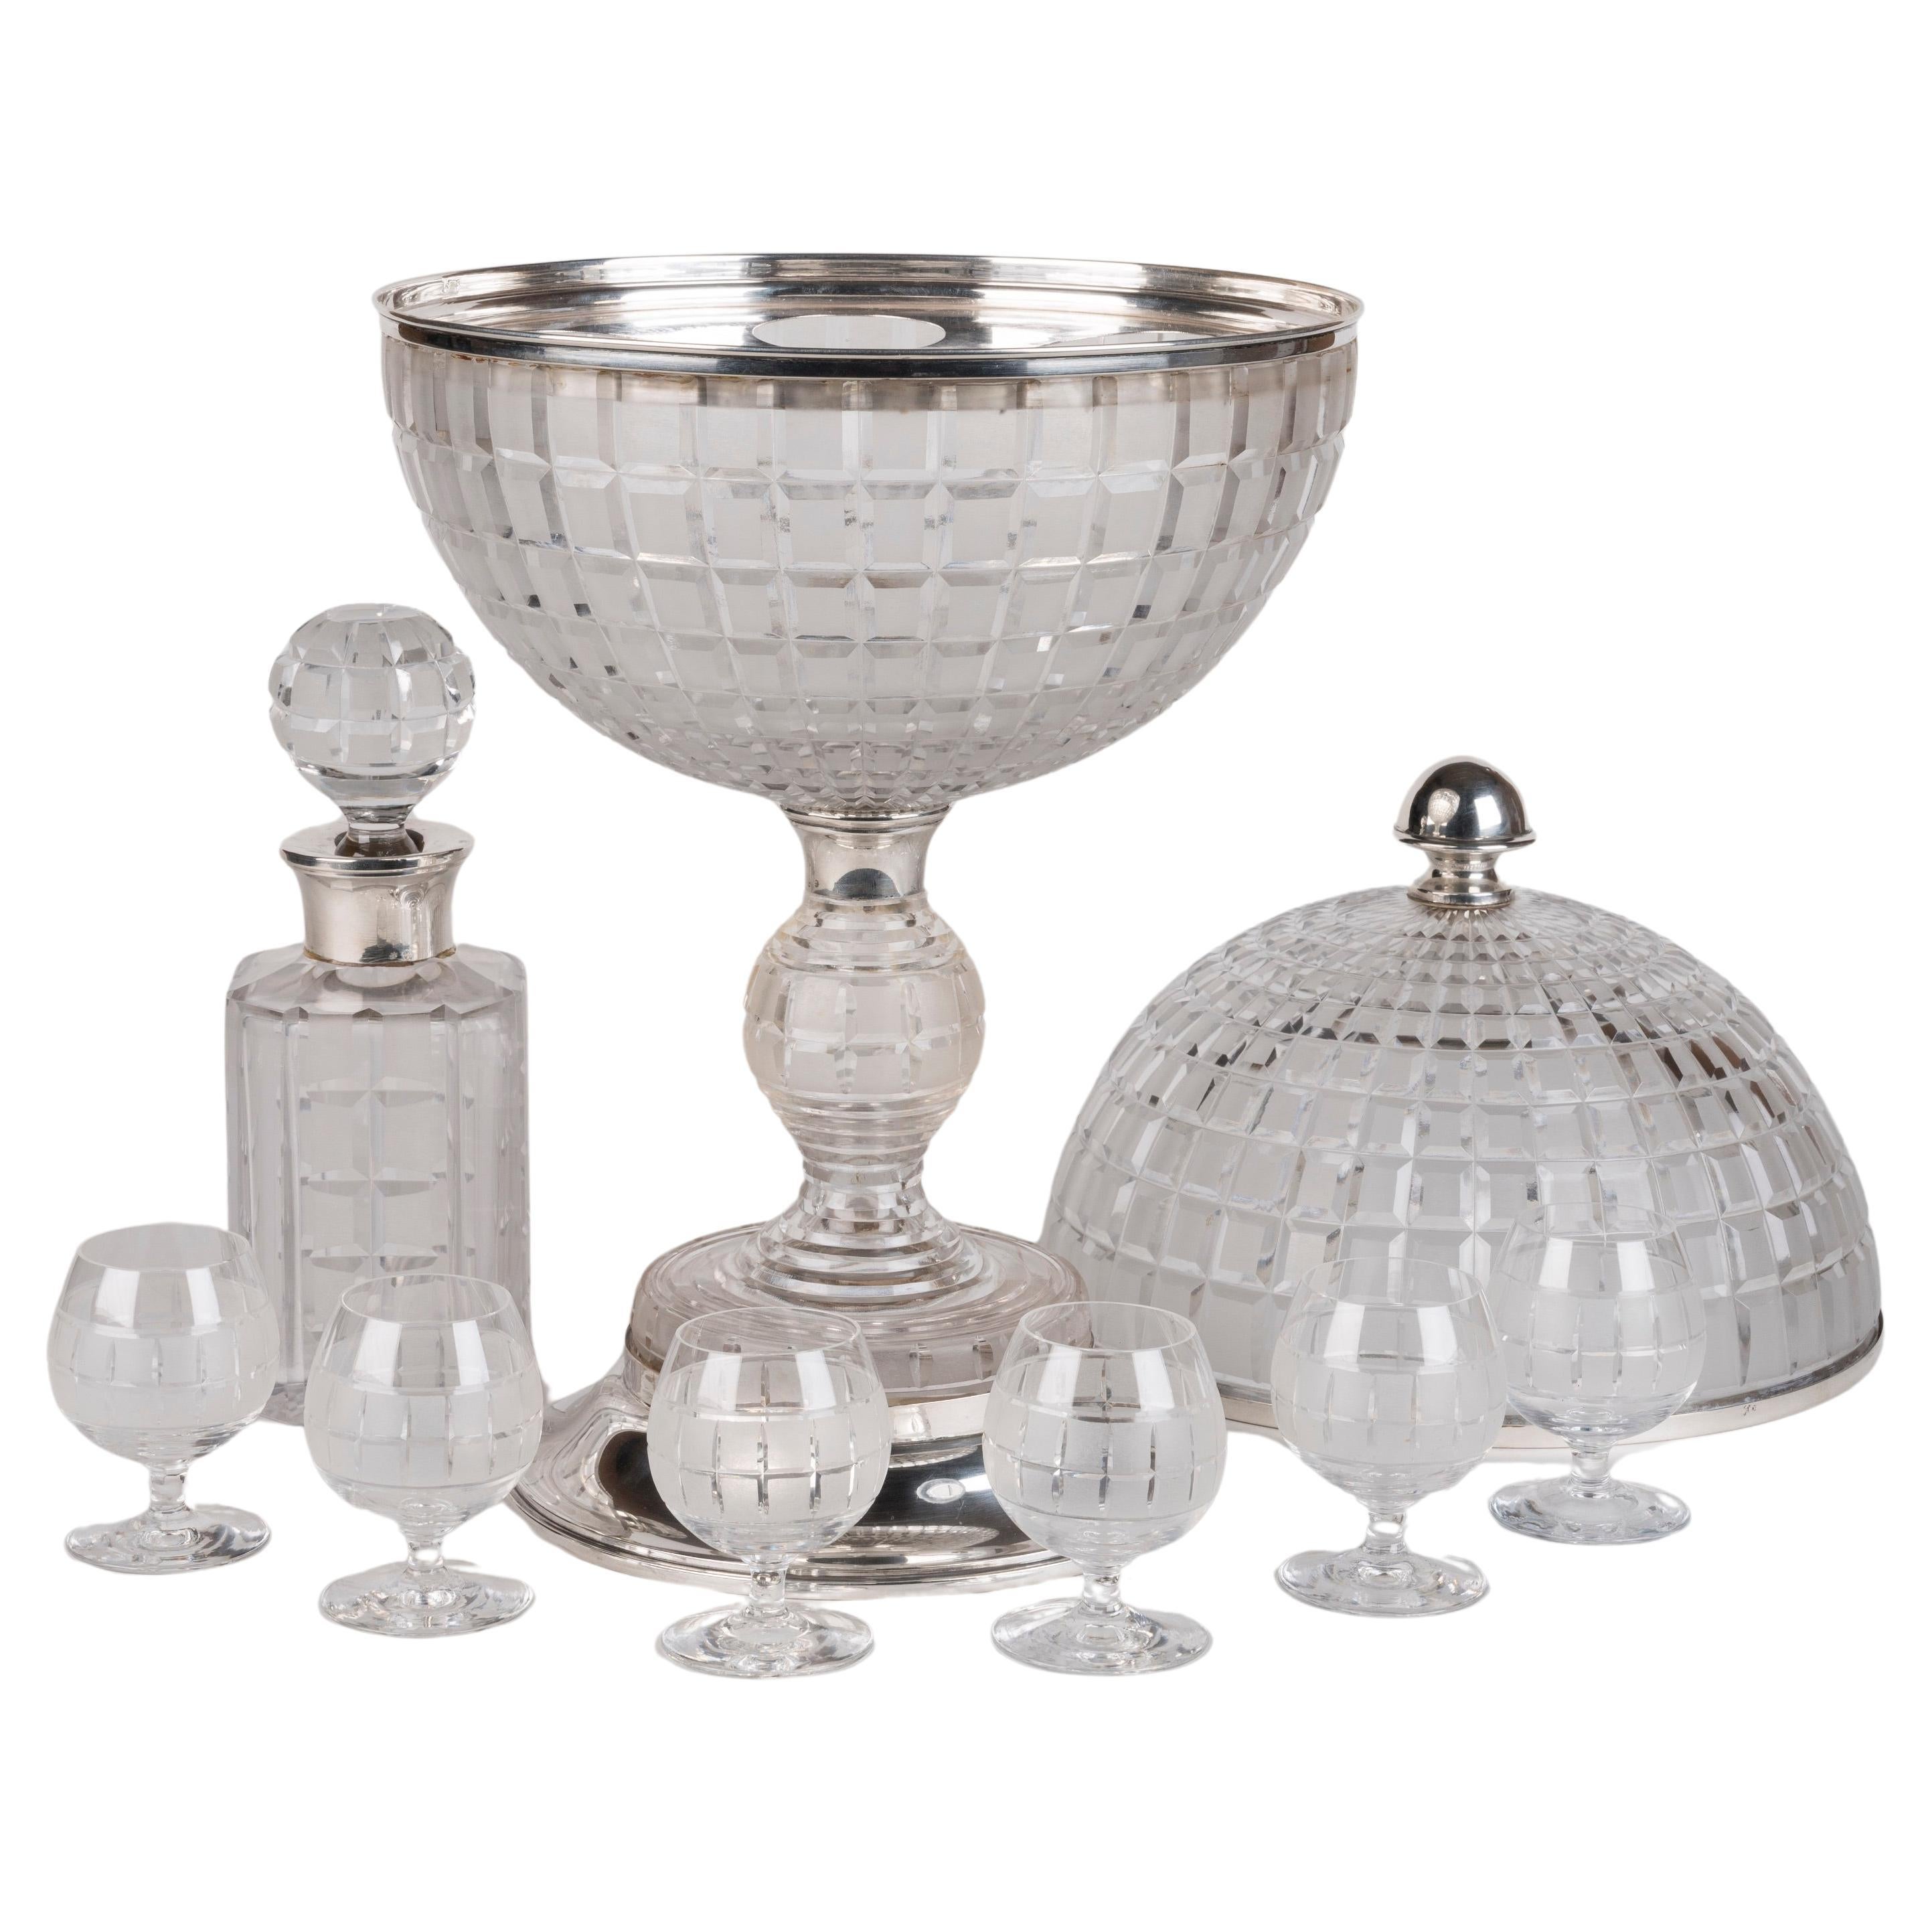 Rare 1930s Art Deco Crystal and Solid Silver Globe Drinks Set For Sale